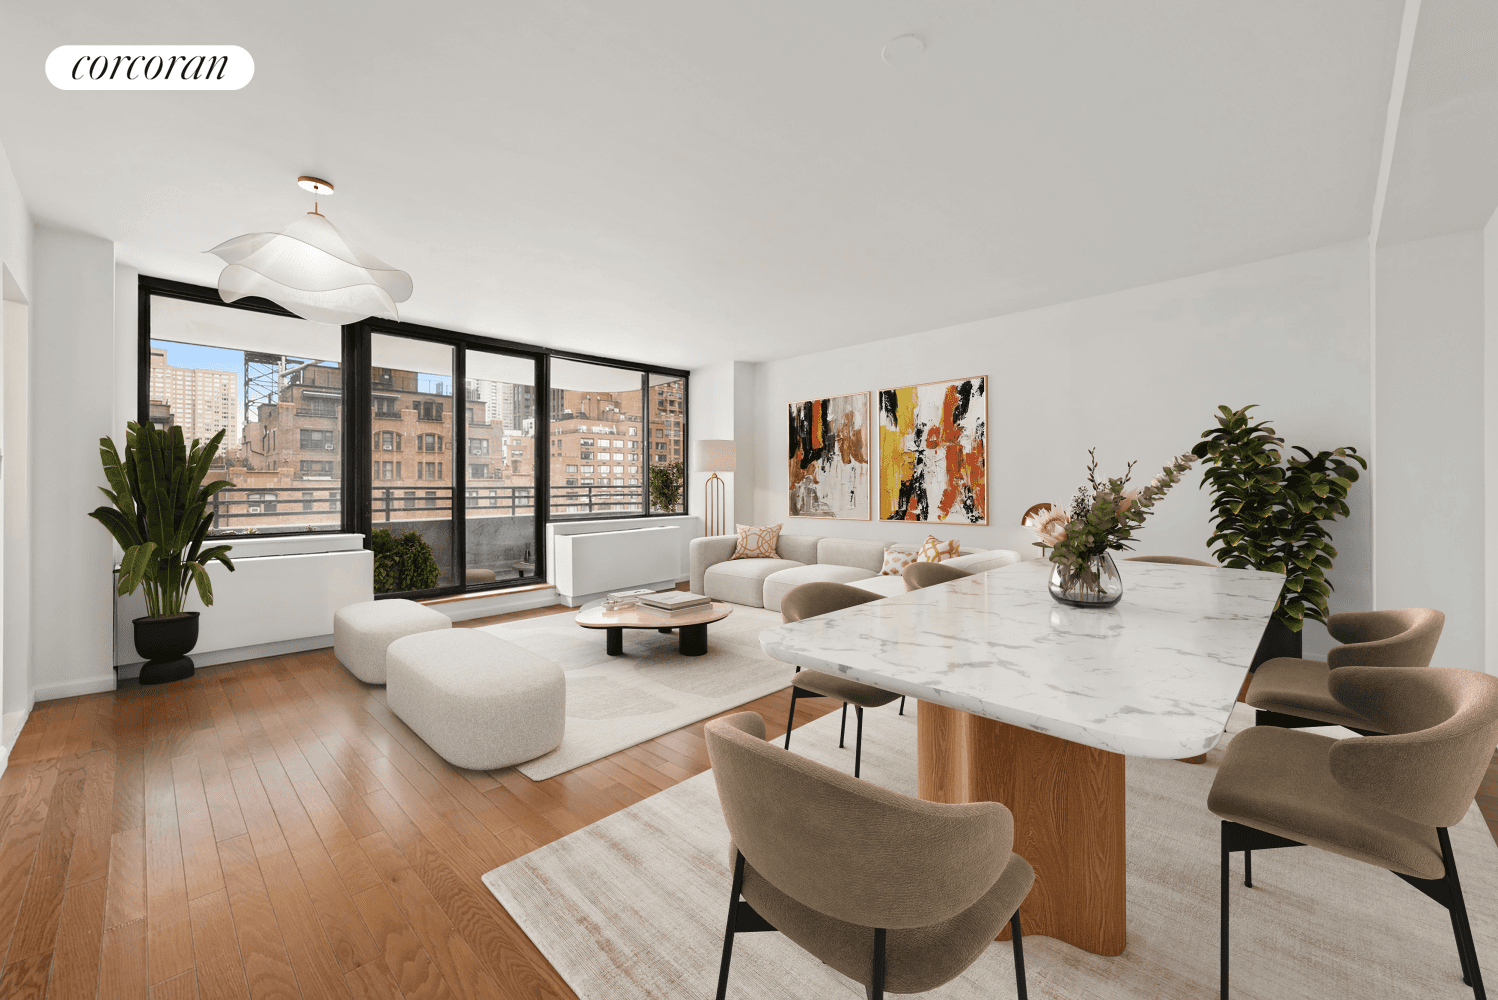 Introducing this stunning property at 309 East 49th Street, offering a spacious 805 square feet of living space.